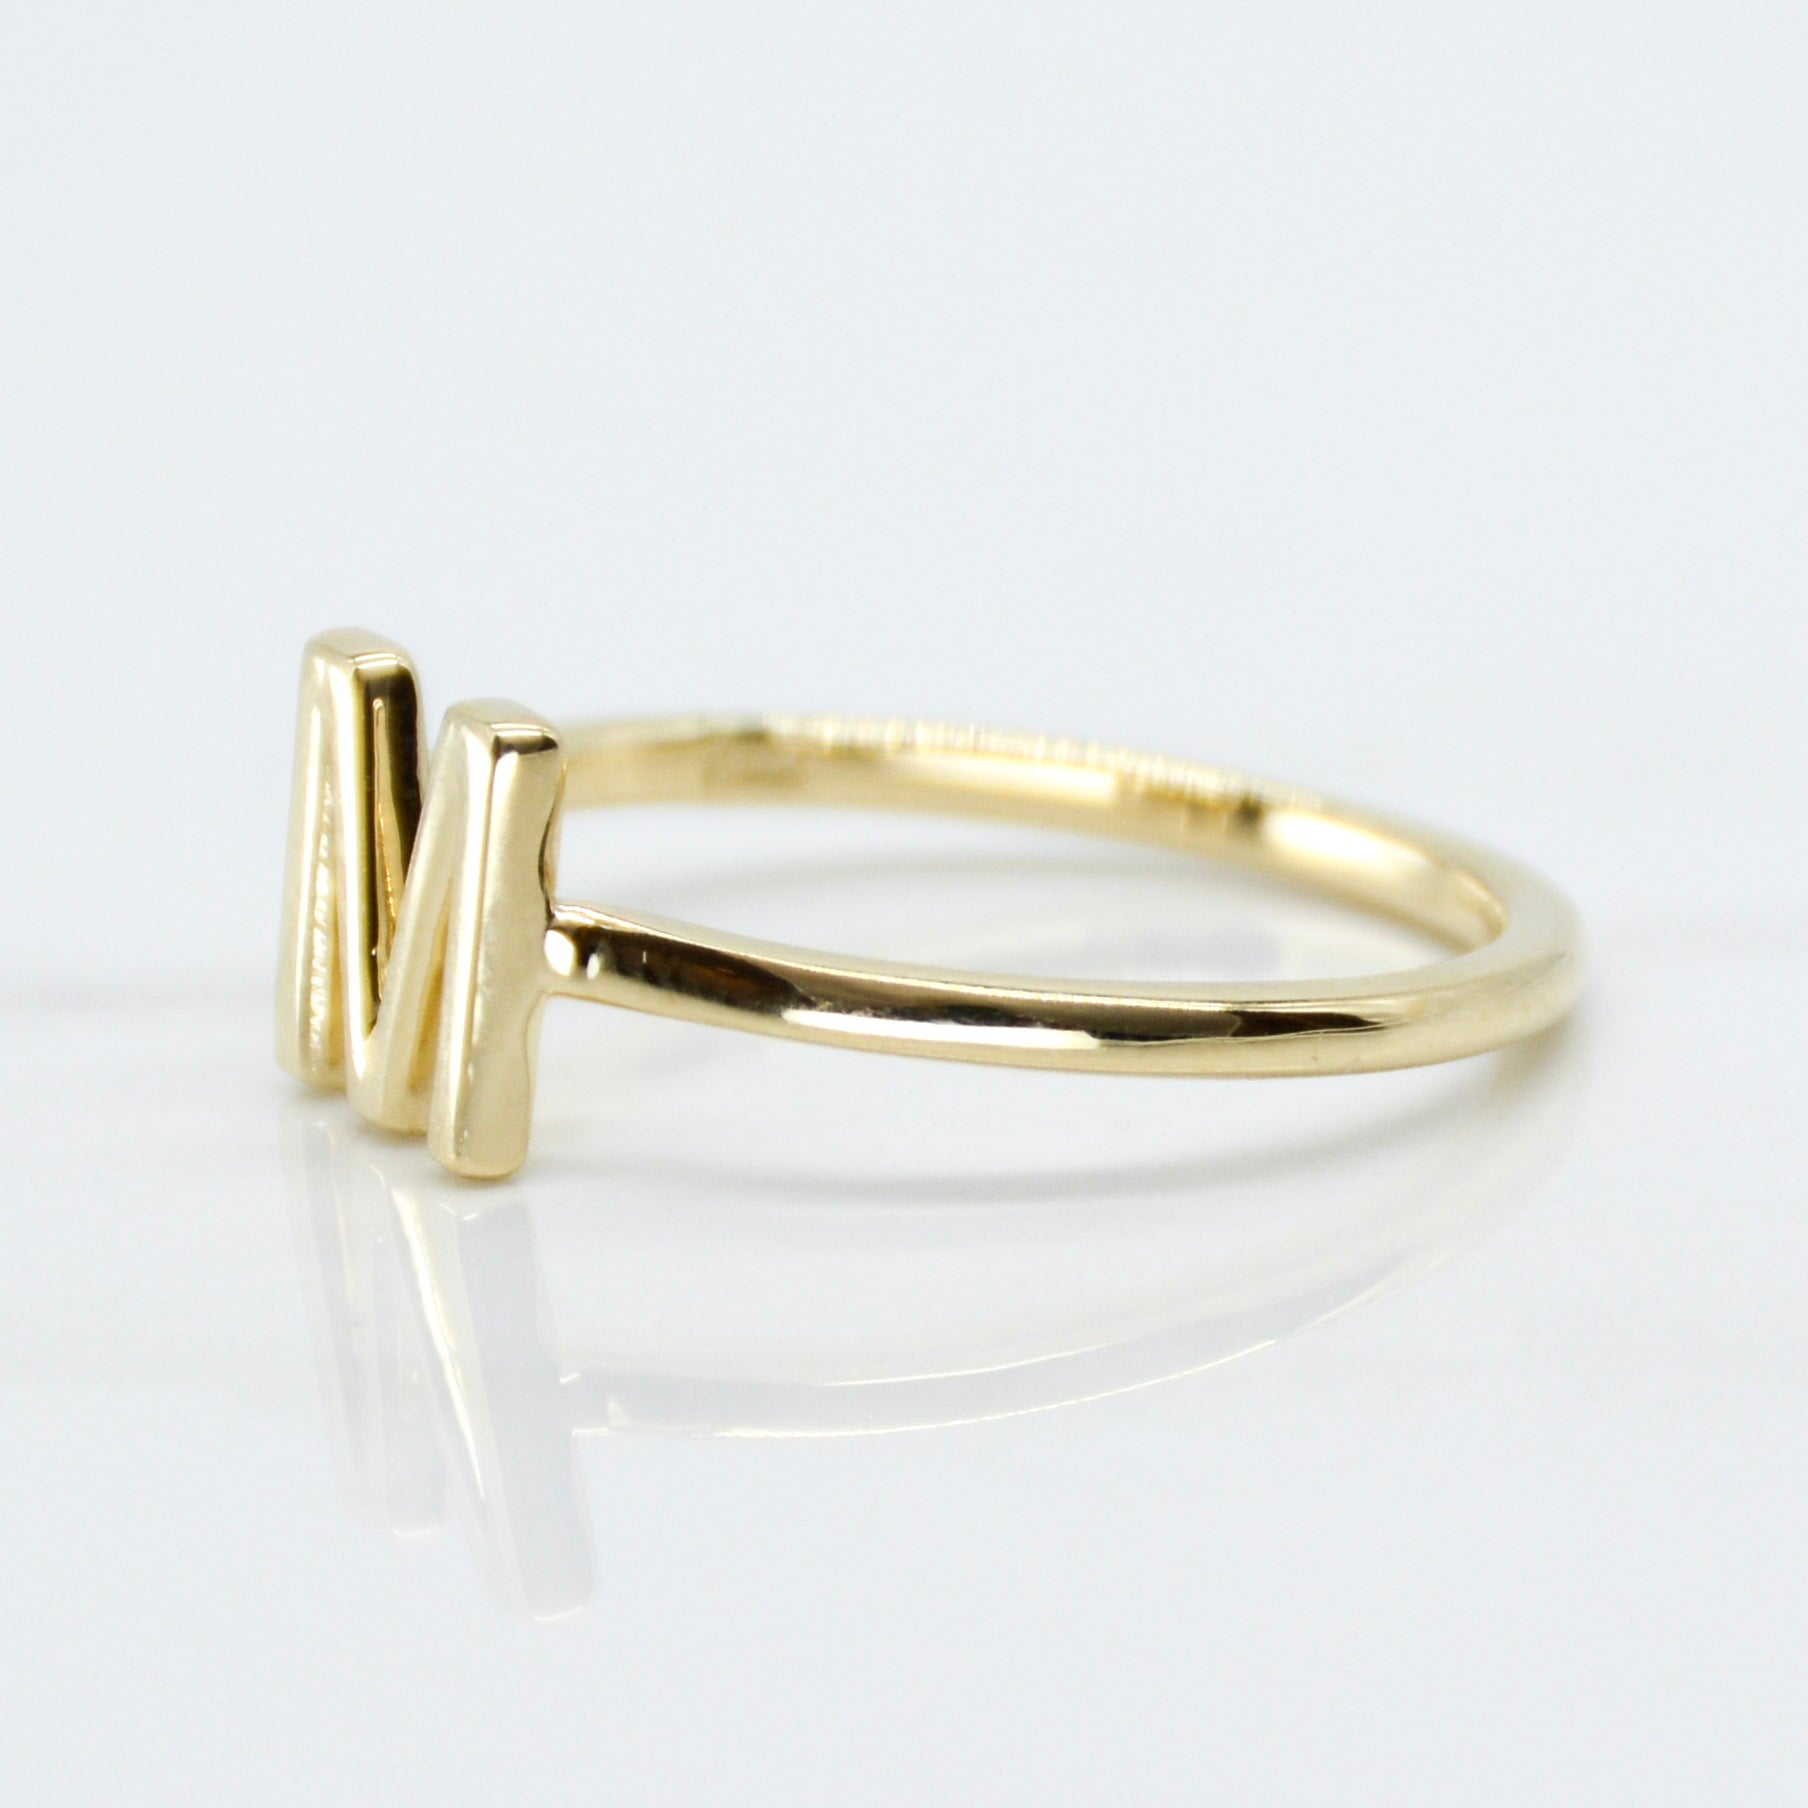 'Bespoke' Initial Rings | Options Available |